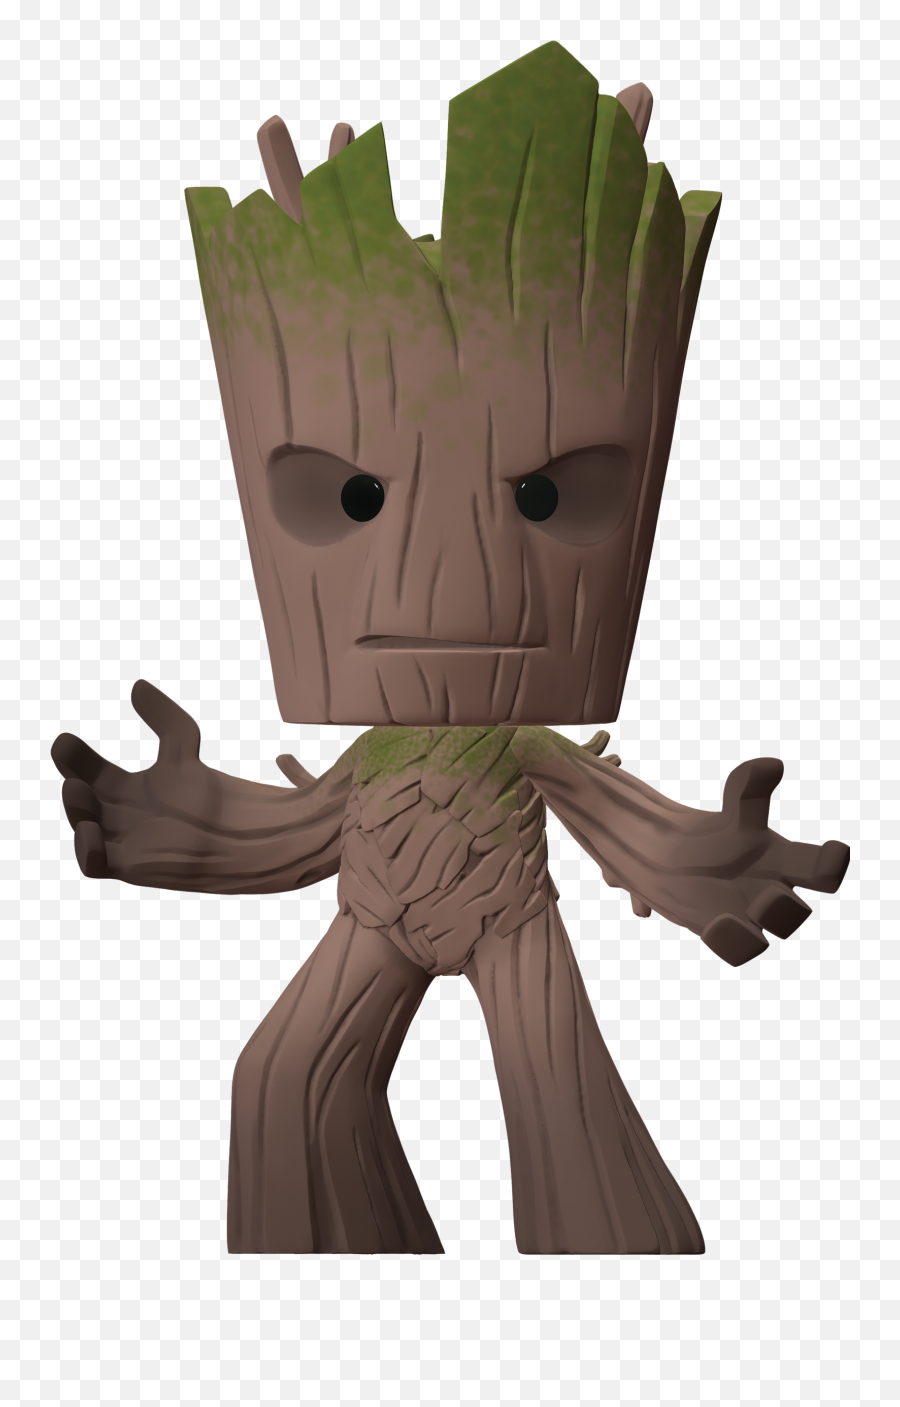 Guardians Of The Galaxy Super Deluxe Figure - Groot Groot Emoji,Guardians Of The Galaxy Logo